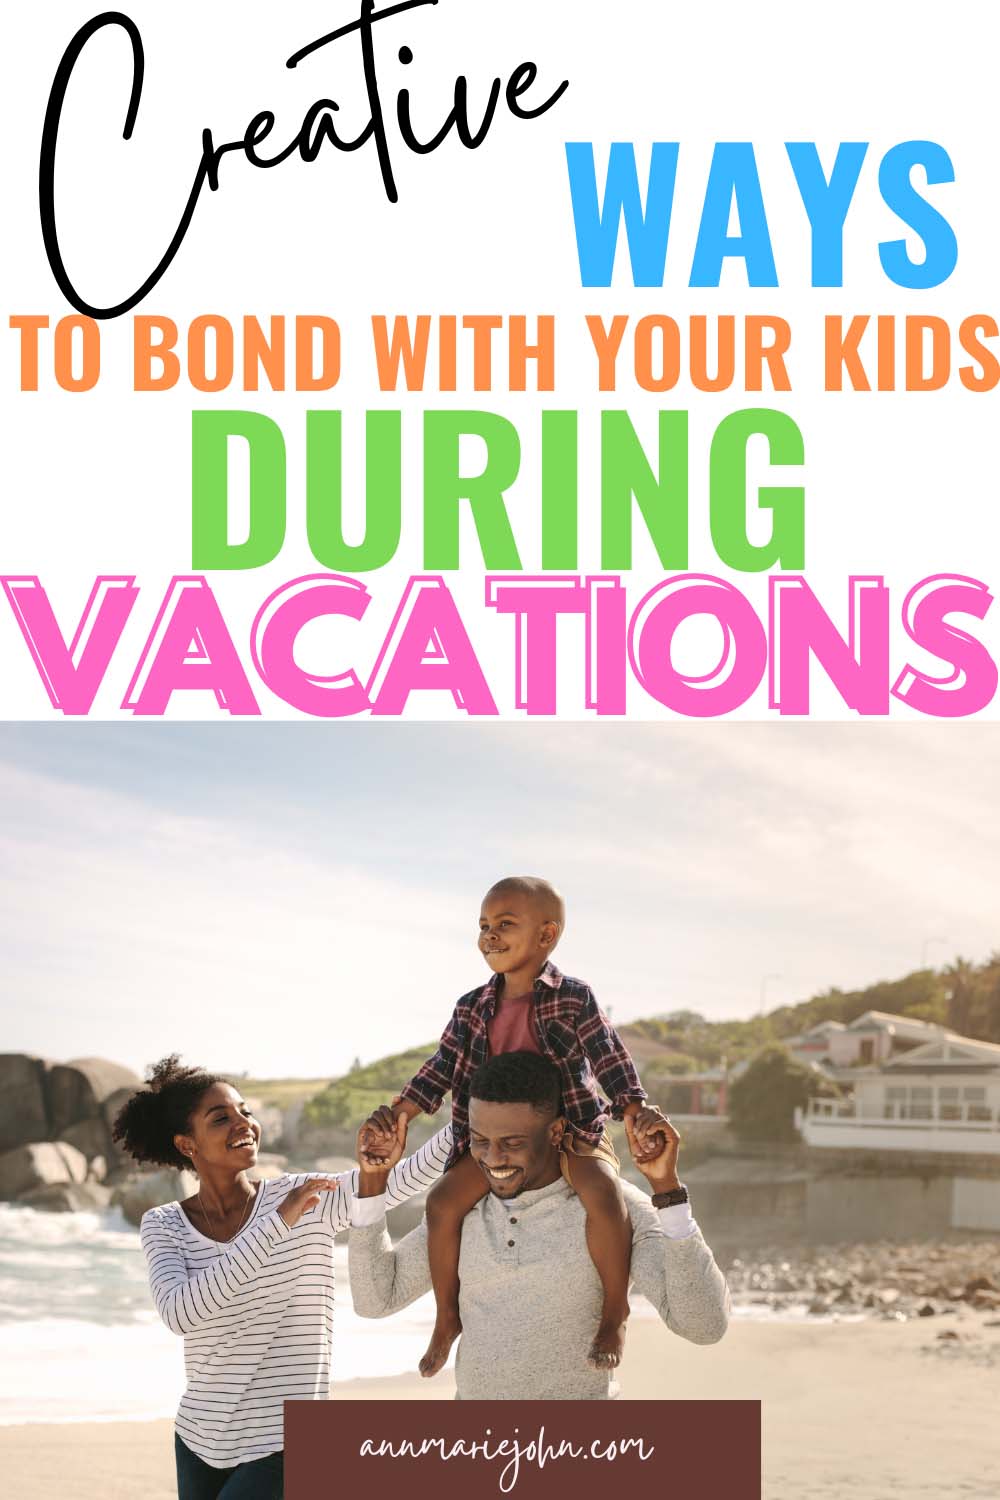 Creative Ways to Bond with Your Kids During Vacations